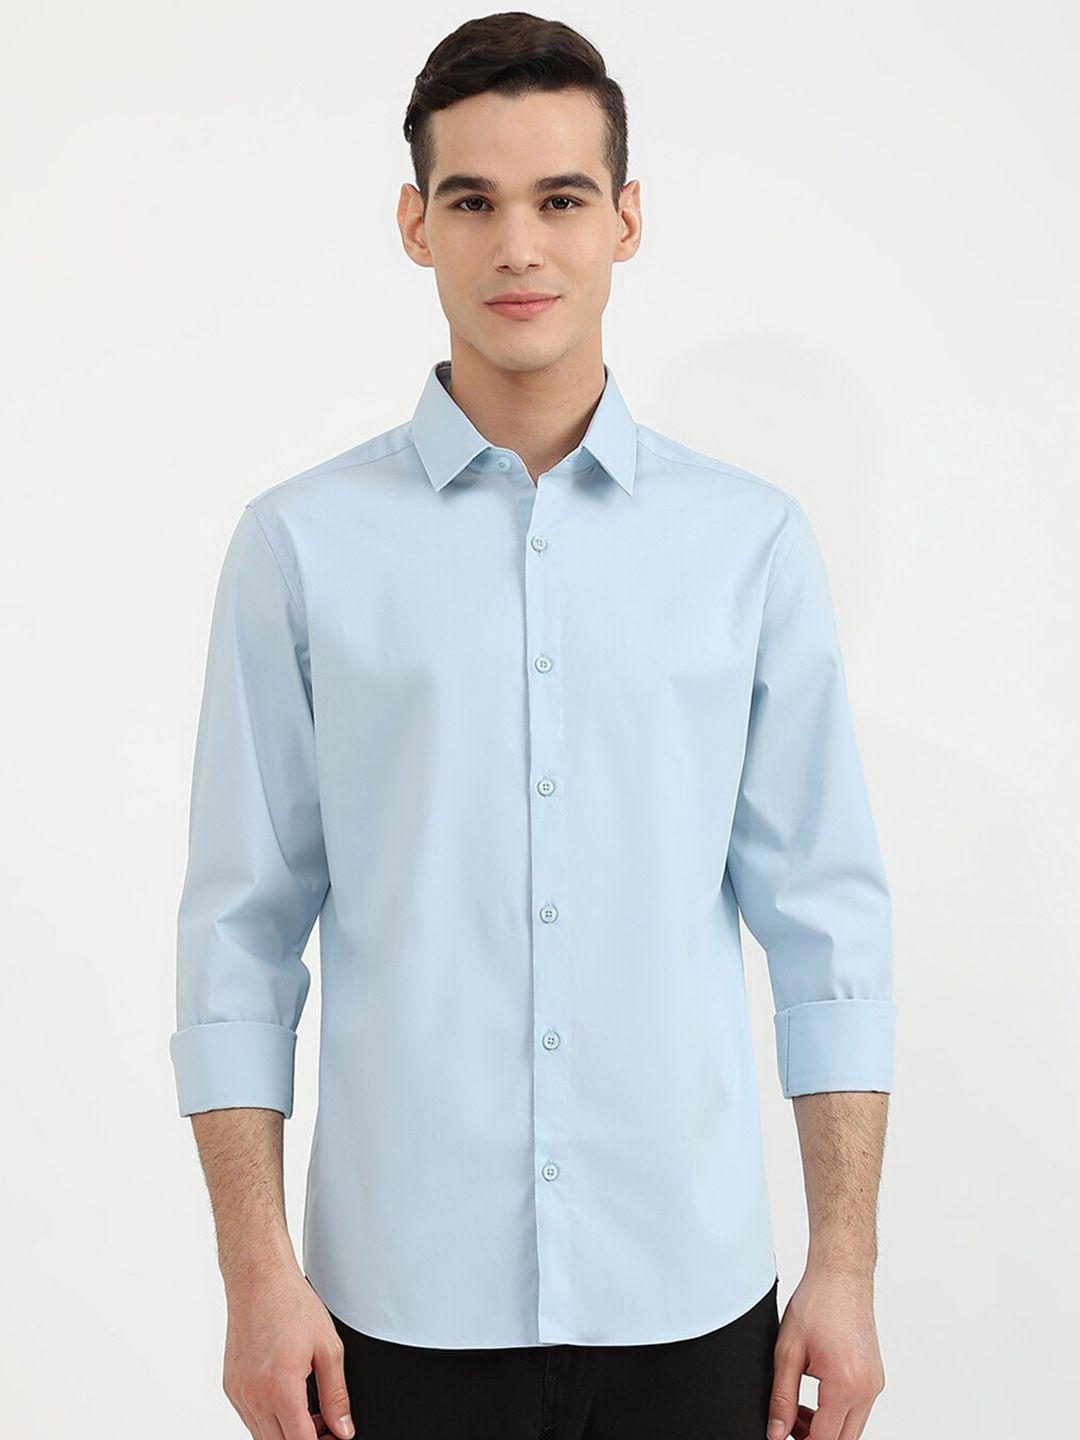 united-colors-of-benetton-men-green-slim-fit-cotton-casual-shirt